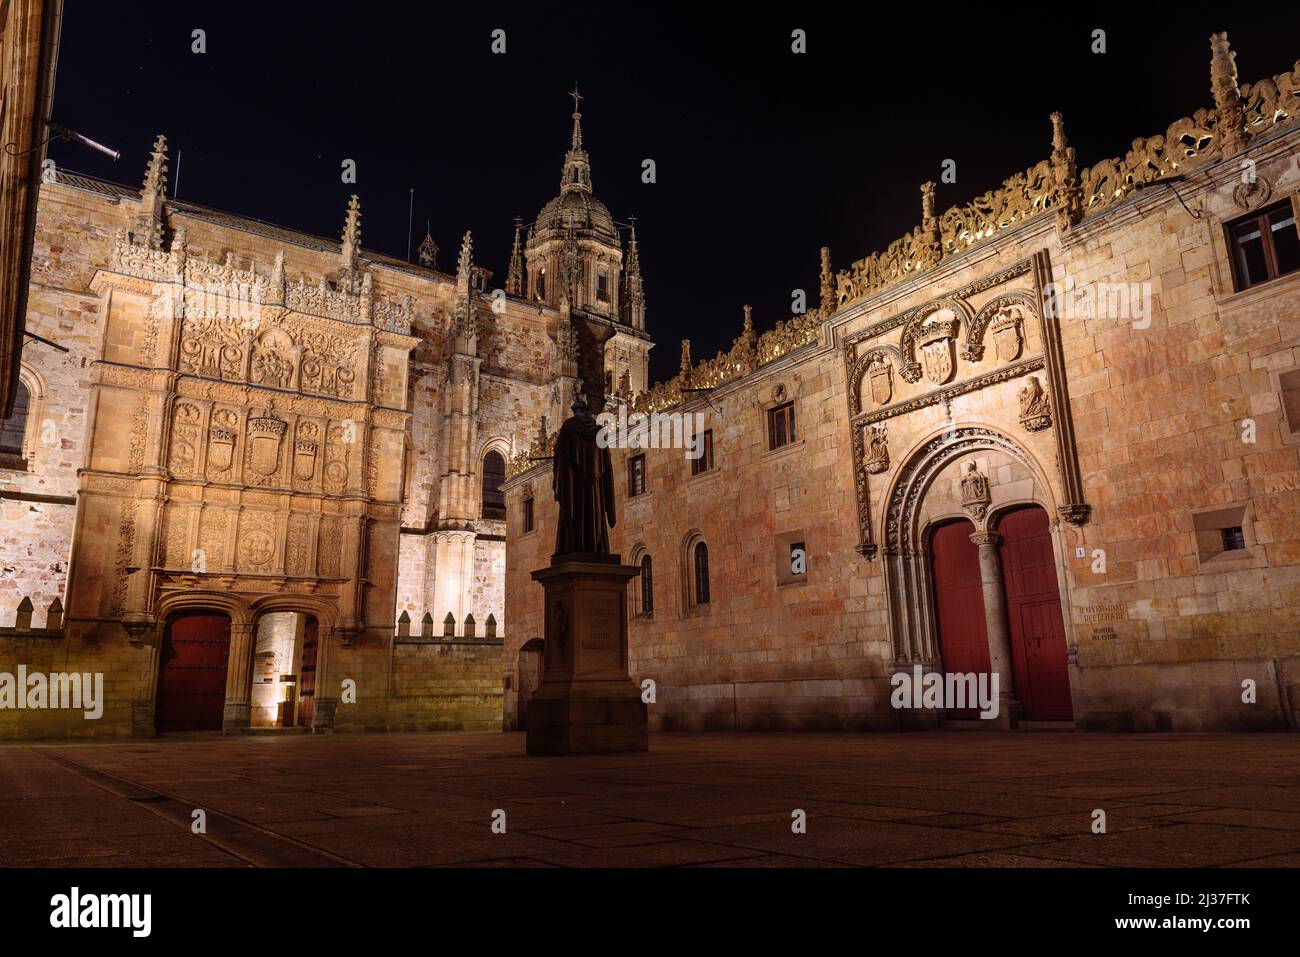 Beautiful view of famous University of Salamanca at night, the oldest university in Spain, Castilla y Leon region. Plateresque architecture. Stock Photo